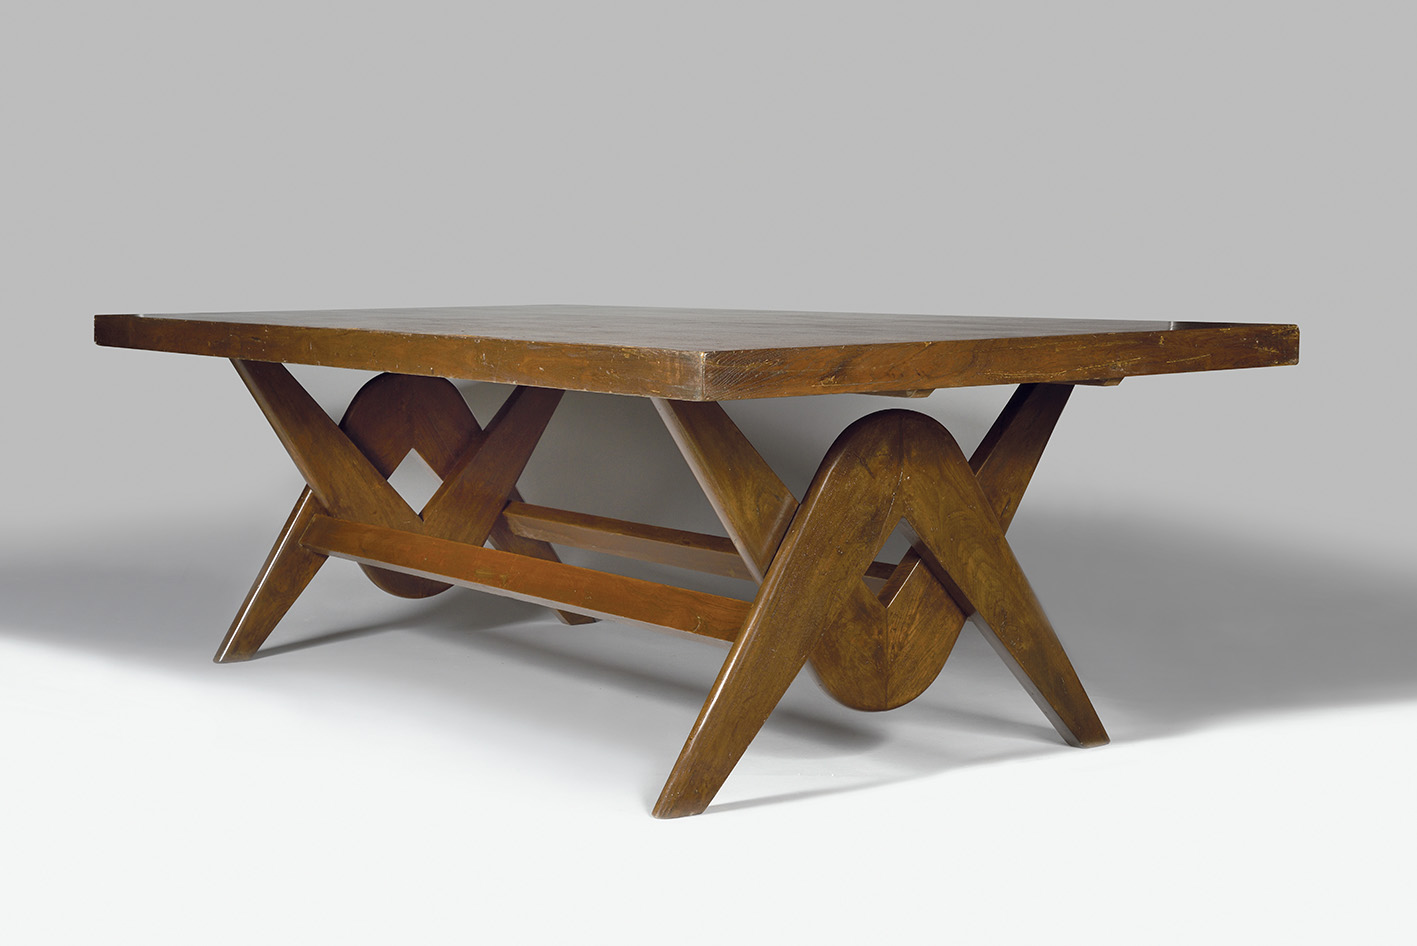 A Pierre Jeanneret Conference Table from Chandigarh